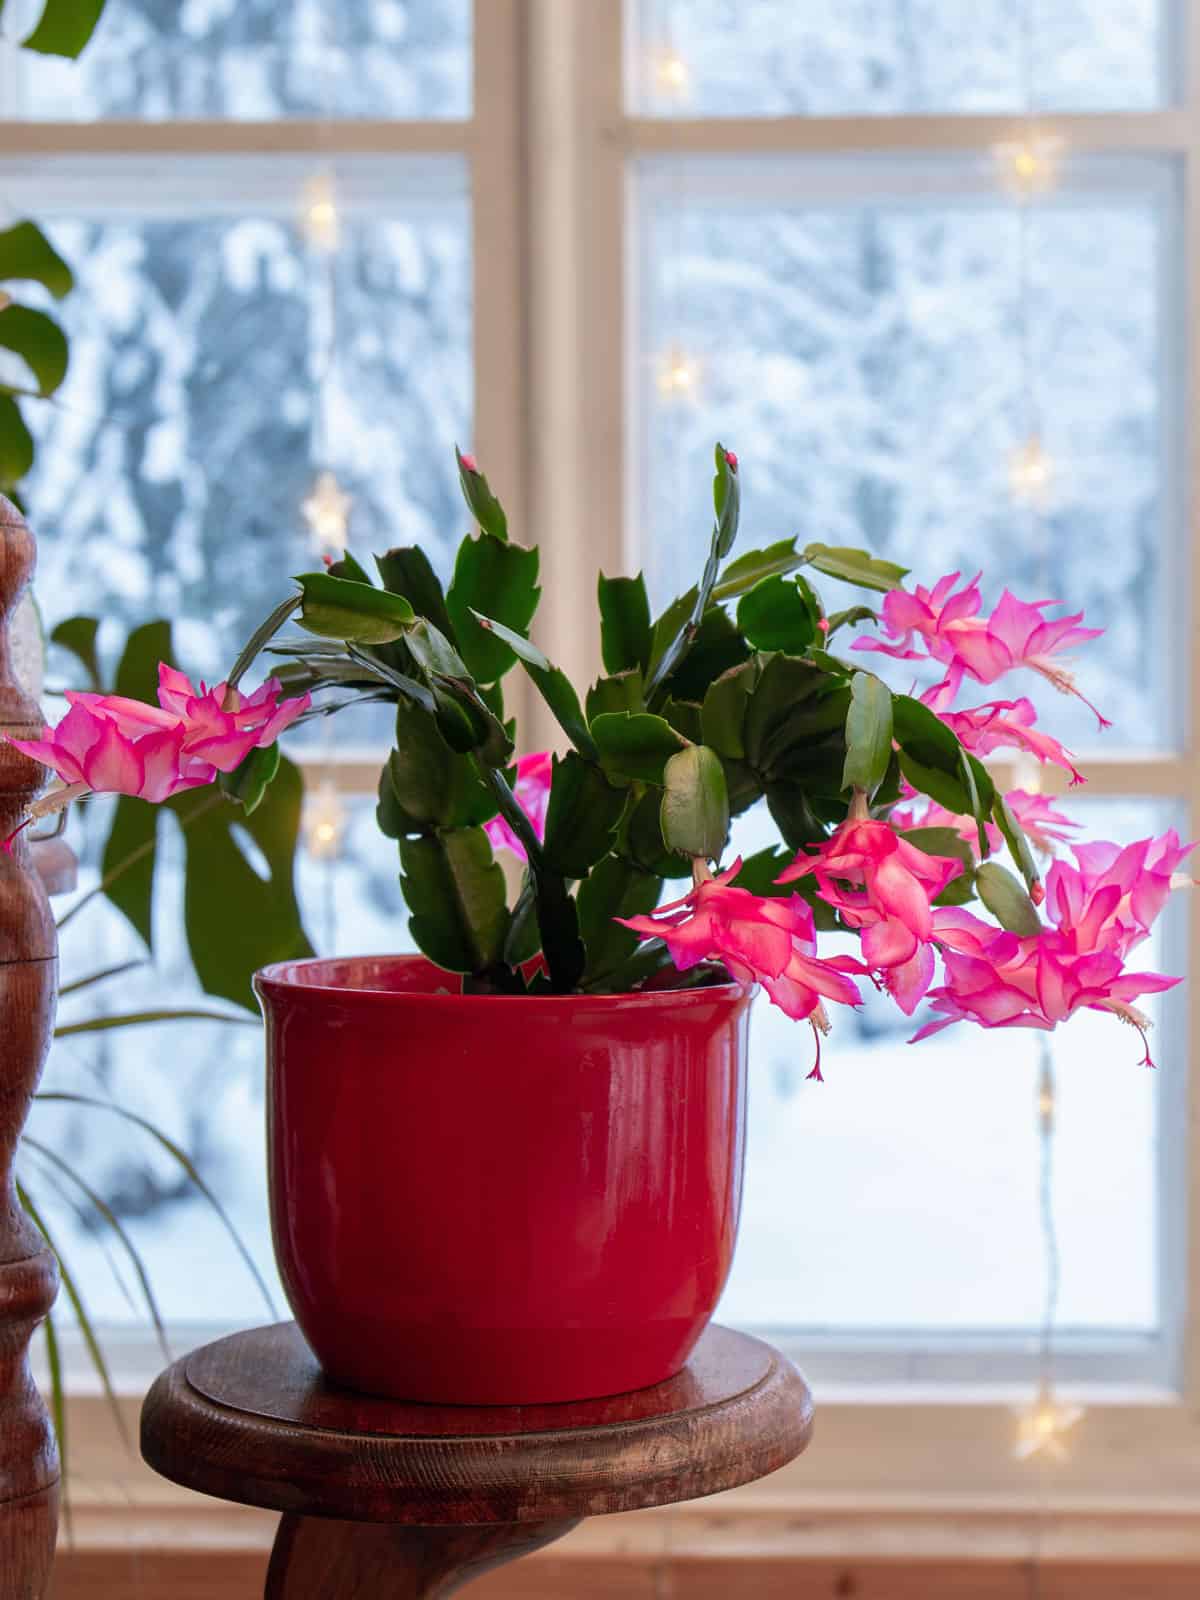 A flowering Thanksgiving Cactus planted on a red pot